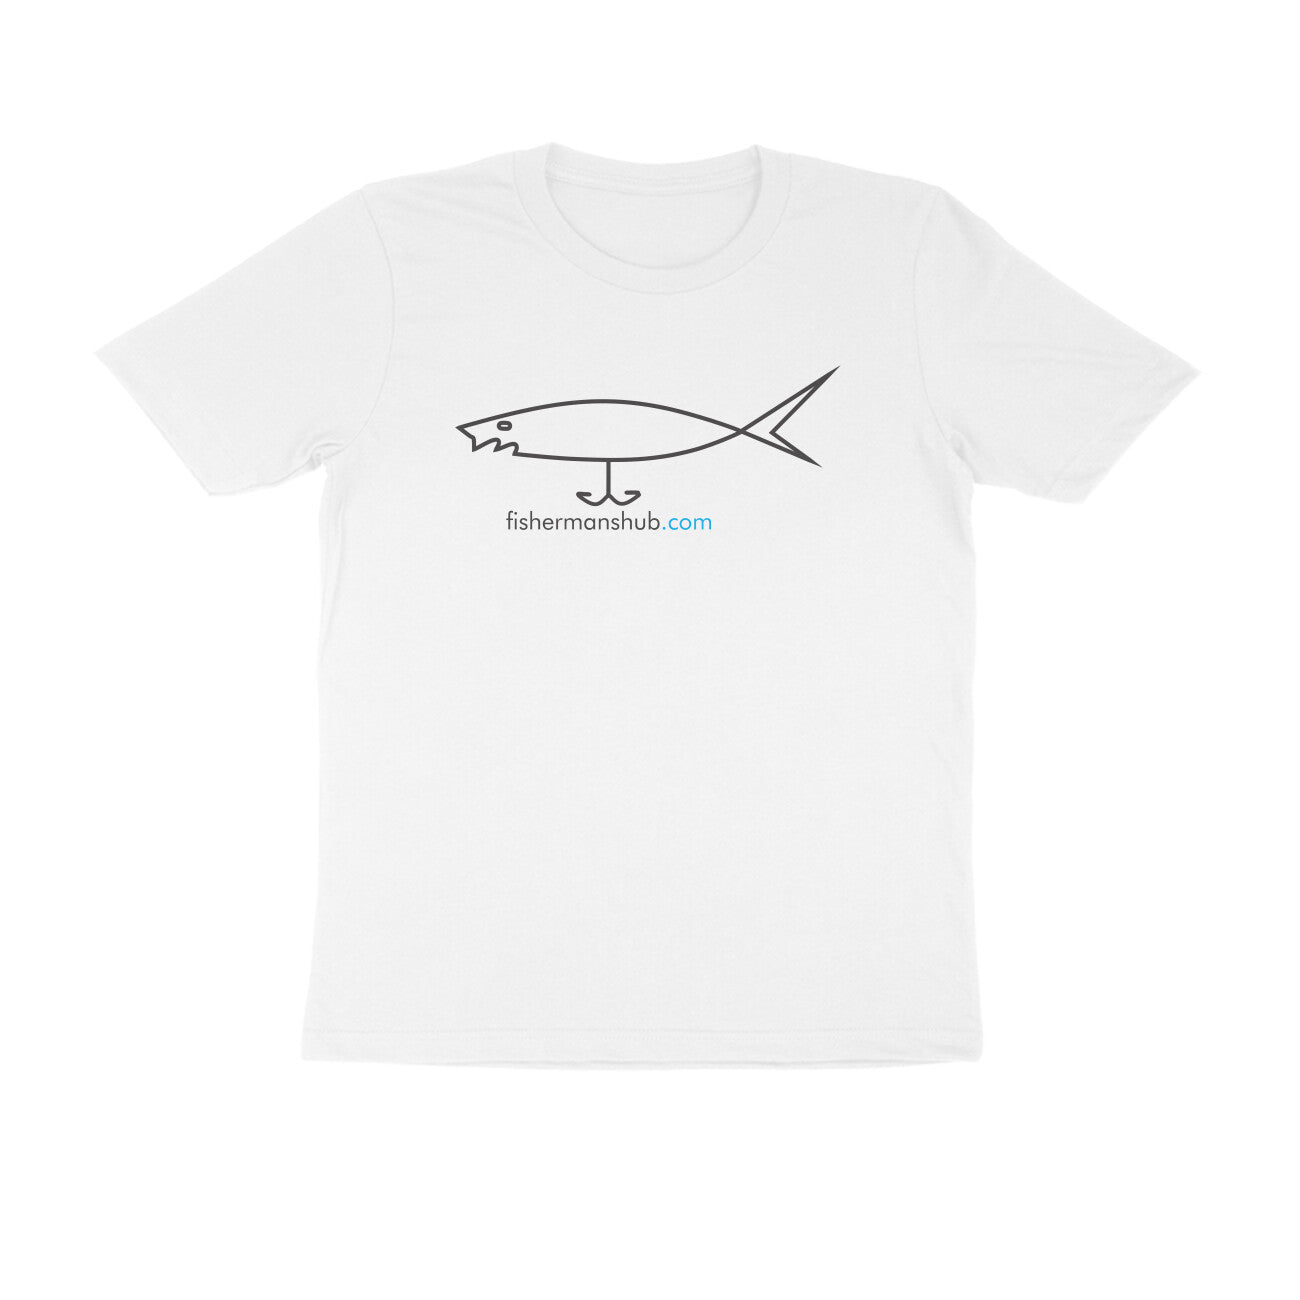 Men's Angling T-shirt's - Keep Calm And Go Fishing